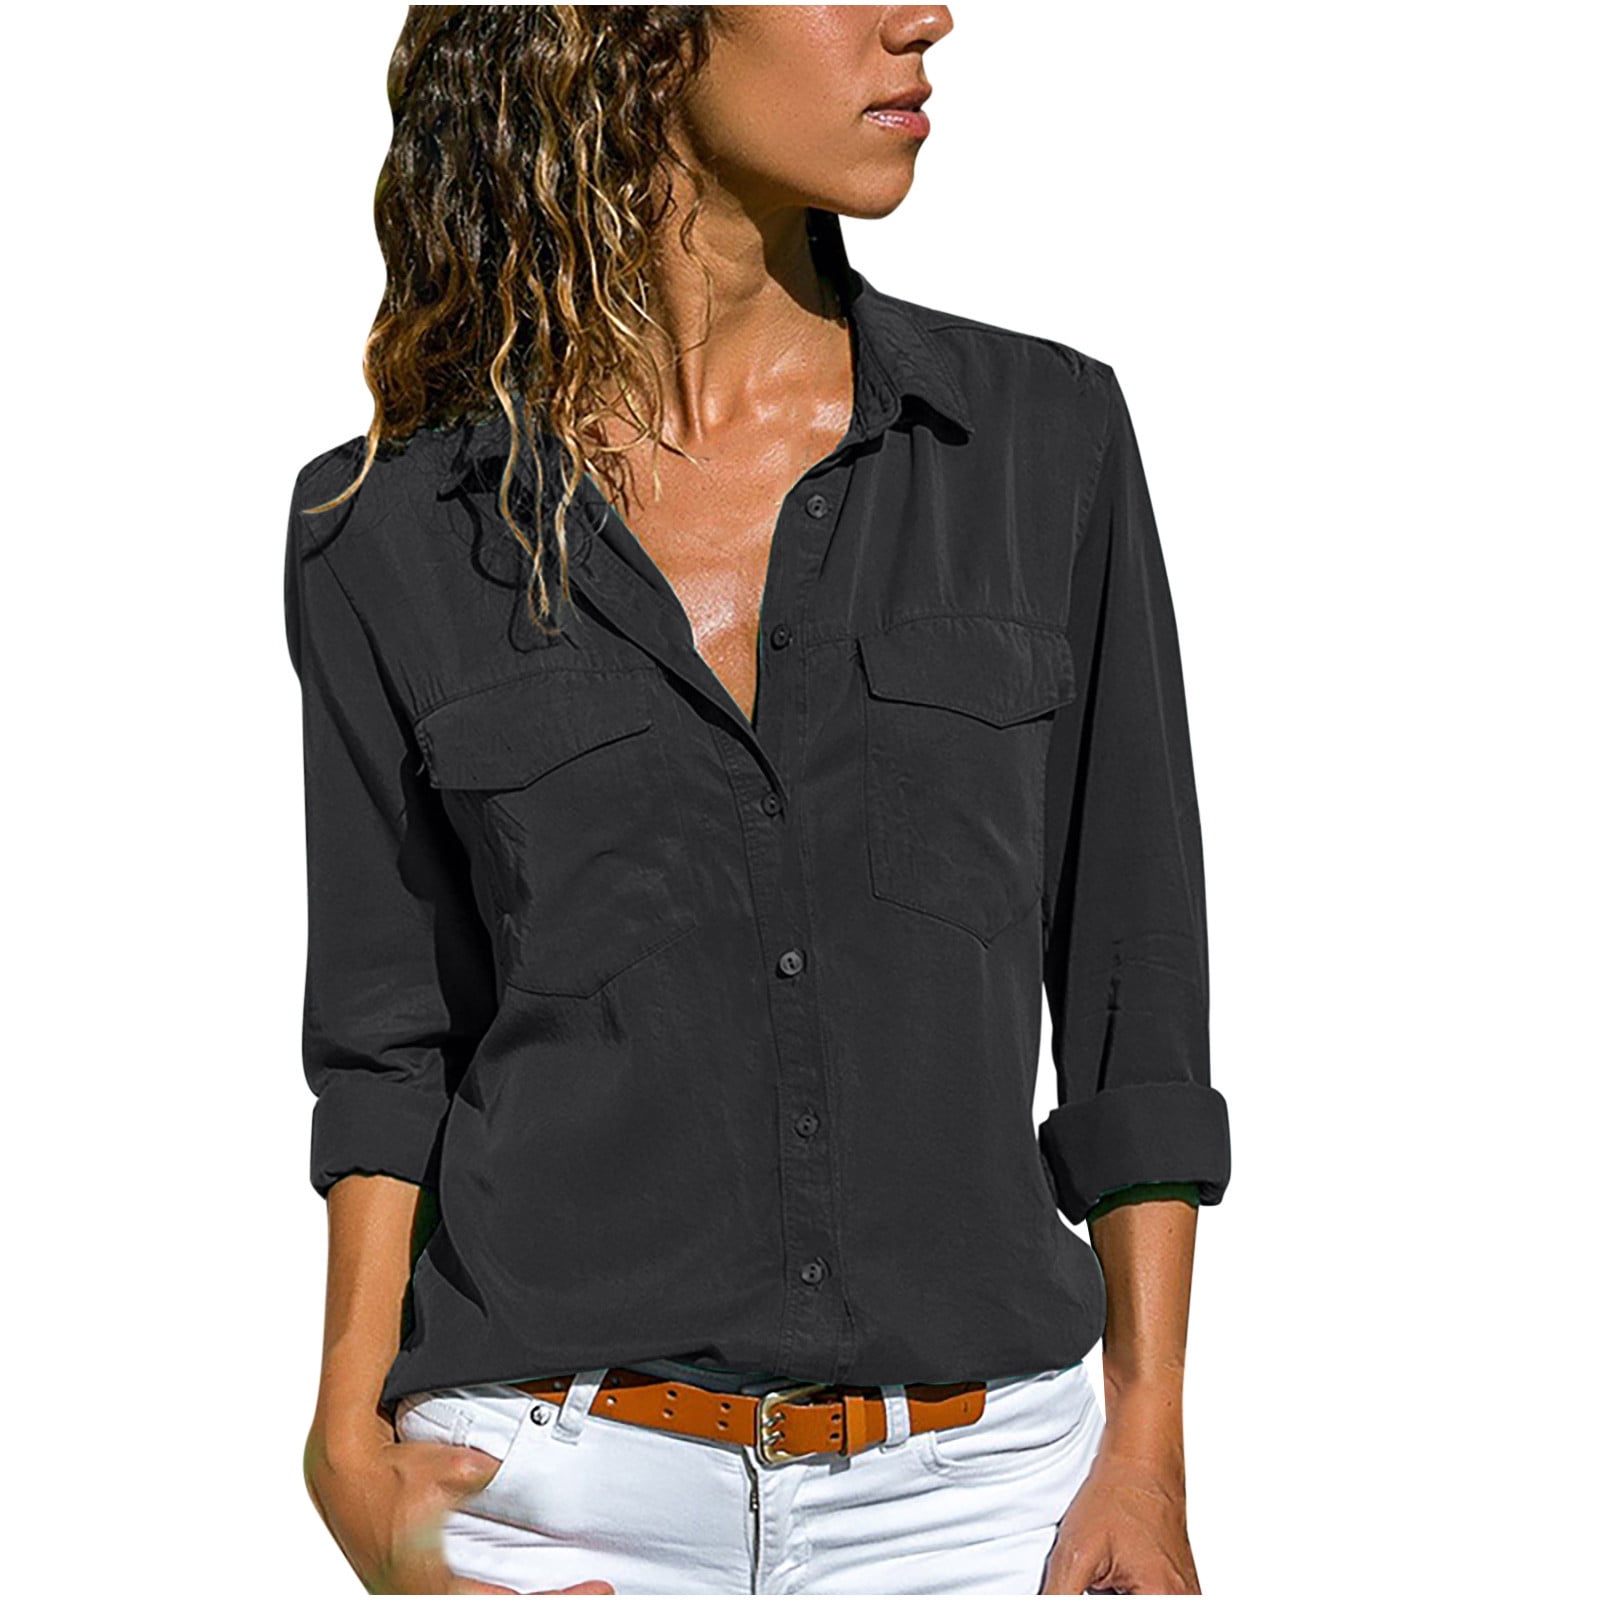 Hfyihgf Women Button Down Shirts with Pockets Long Sleeve Office Work  Blouses Casual Business Tops Slim Fit Chiffon Shirts Plus Size